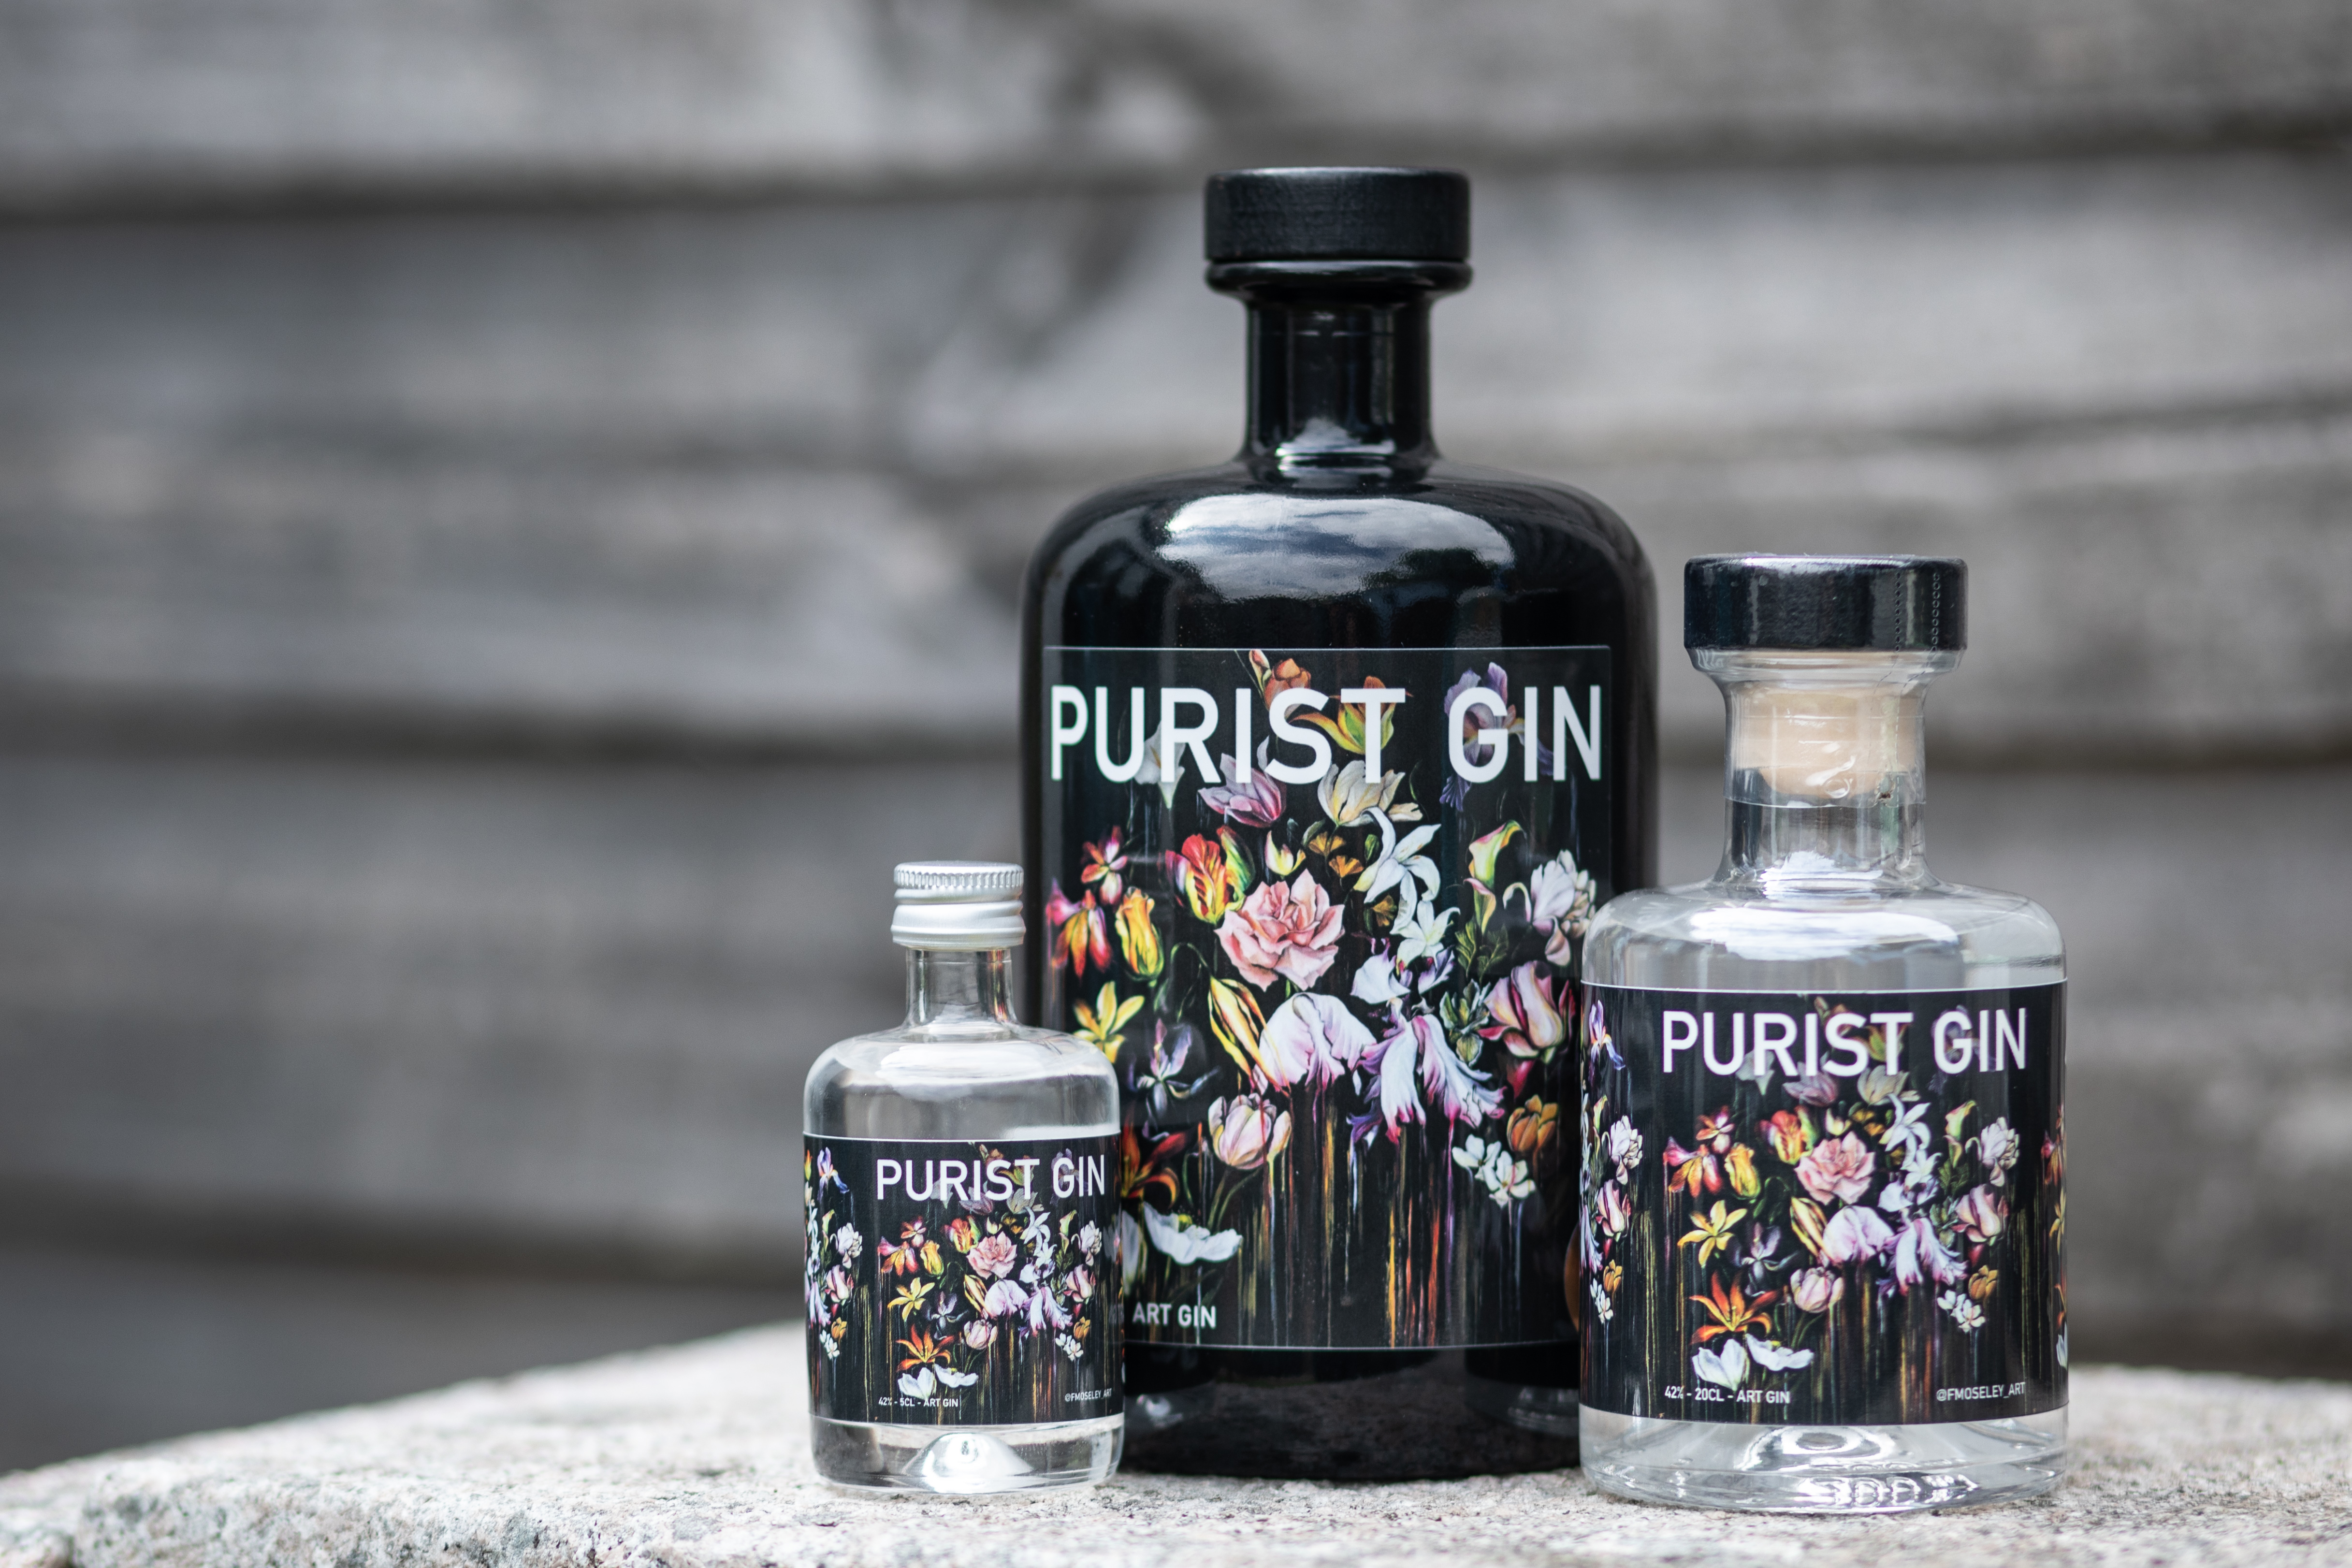 Greenshoots: Scots youngster caught selling bootleg gin at school goes legit by creating award-winning brand